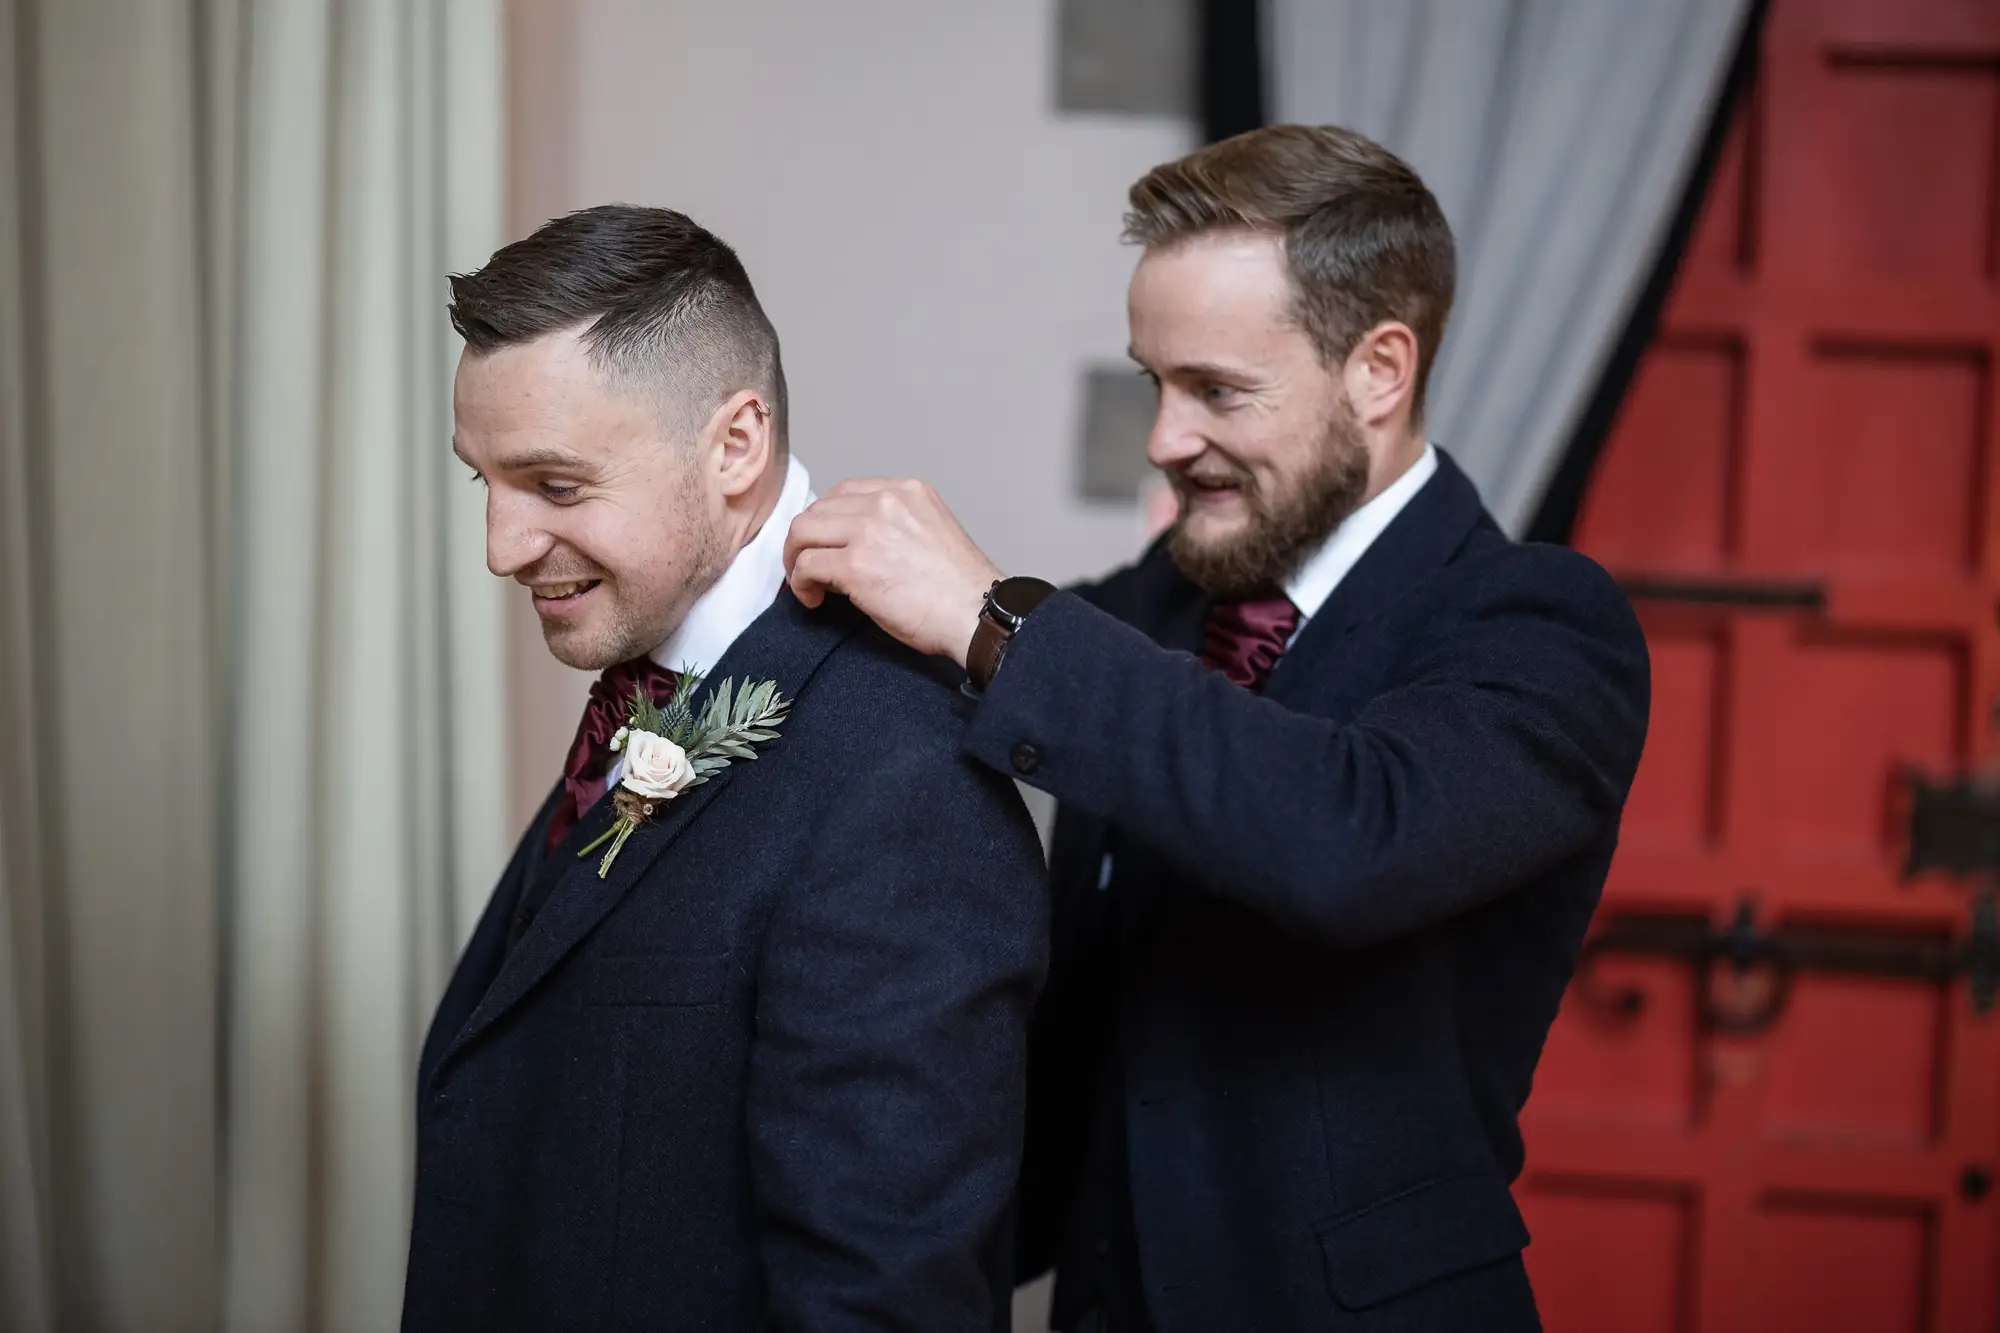 A man adjusts the boutonniere on the lapel of another man's dark suit in an elegant room, both smiling subtly.